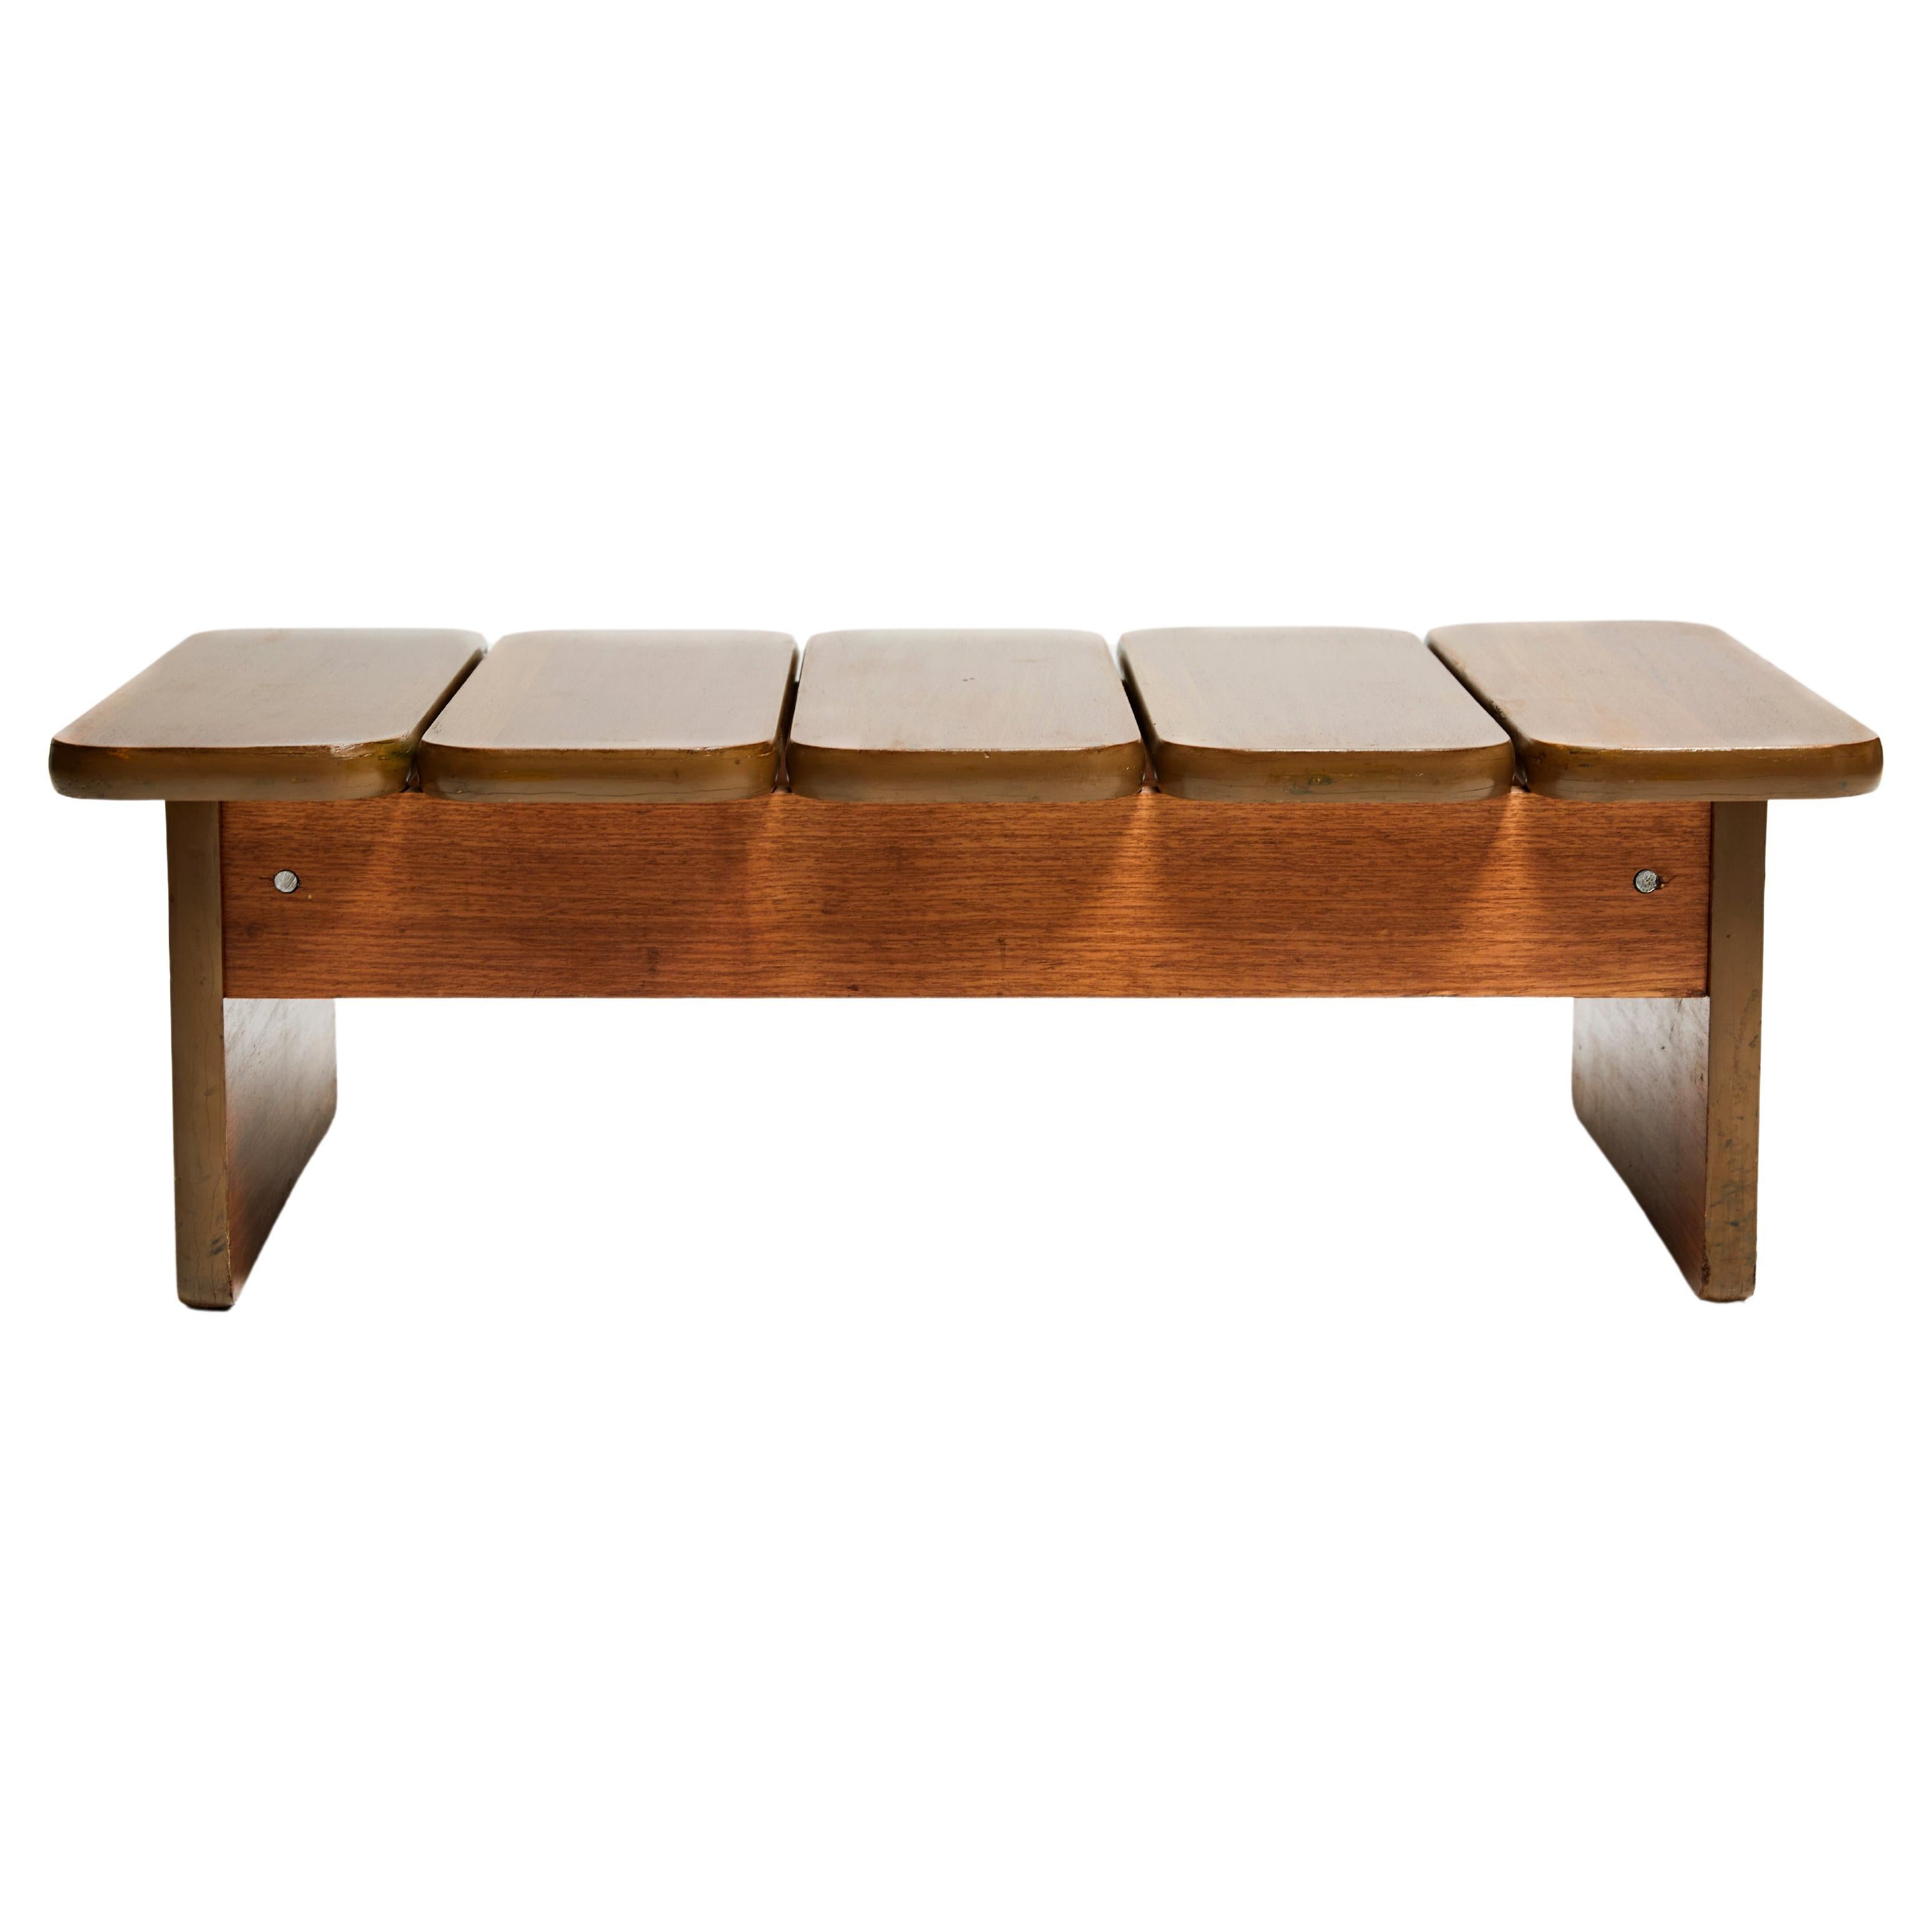 Available now, this Brazilian Modern Bench in Hardwood designed by Geraldo de Barros for Hobjeto in the seventies is nothing less than gorgeous!

This Mid-century modern bench is made of hardwood and consists of a low base structure five wood slabs